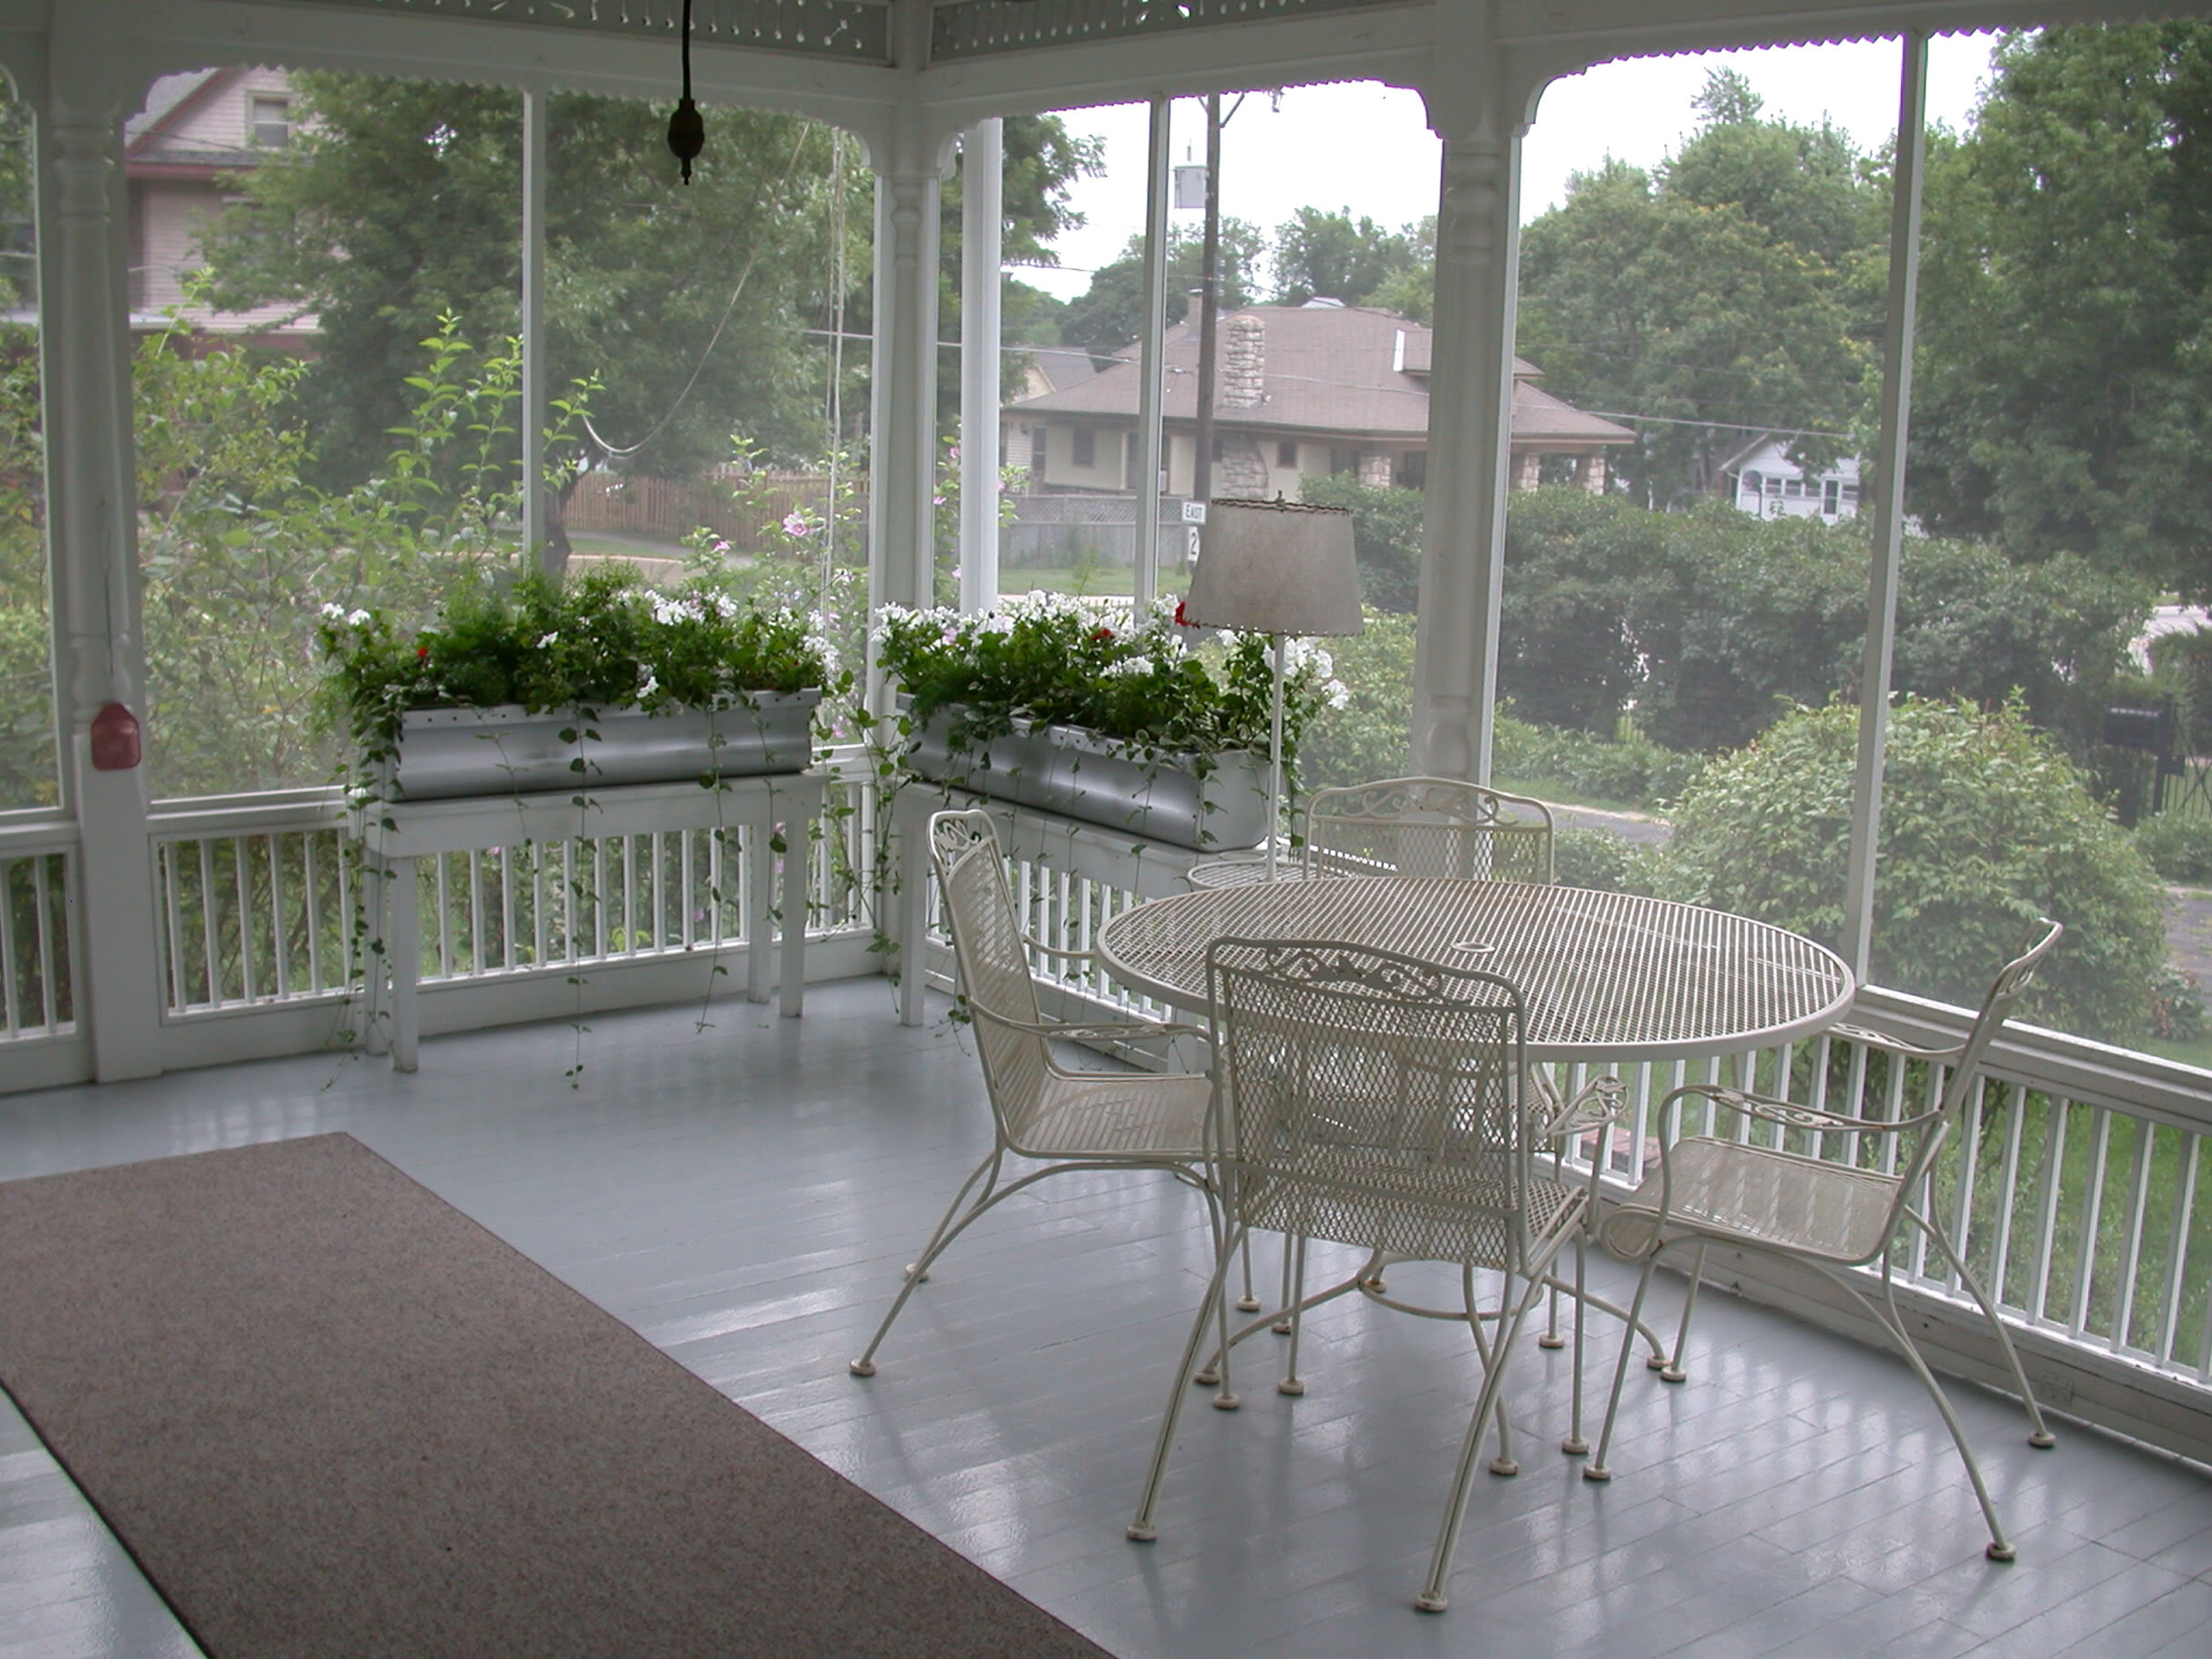 Screened in porch, with metal table and chairs, some greenery in pots.